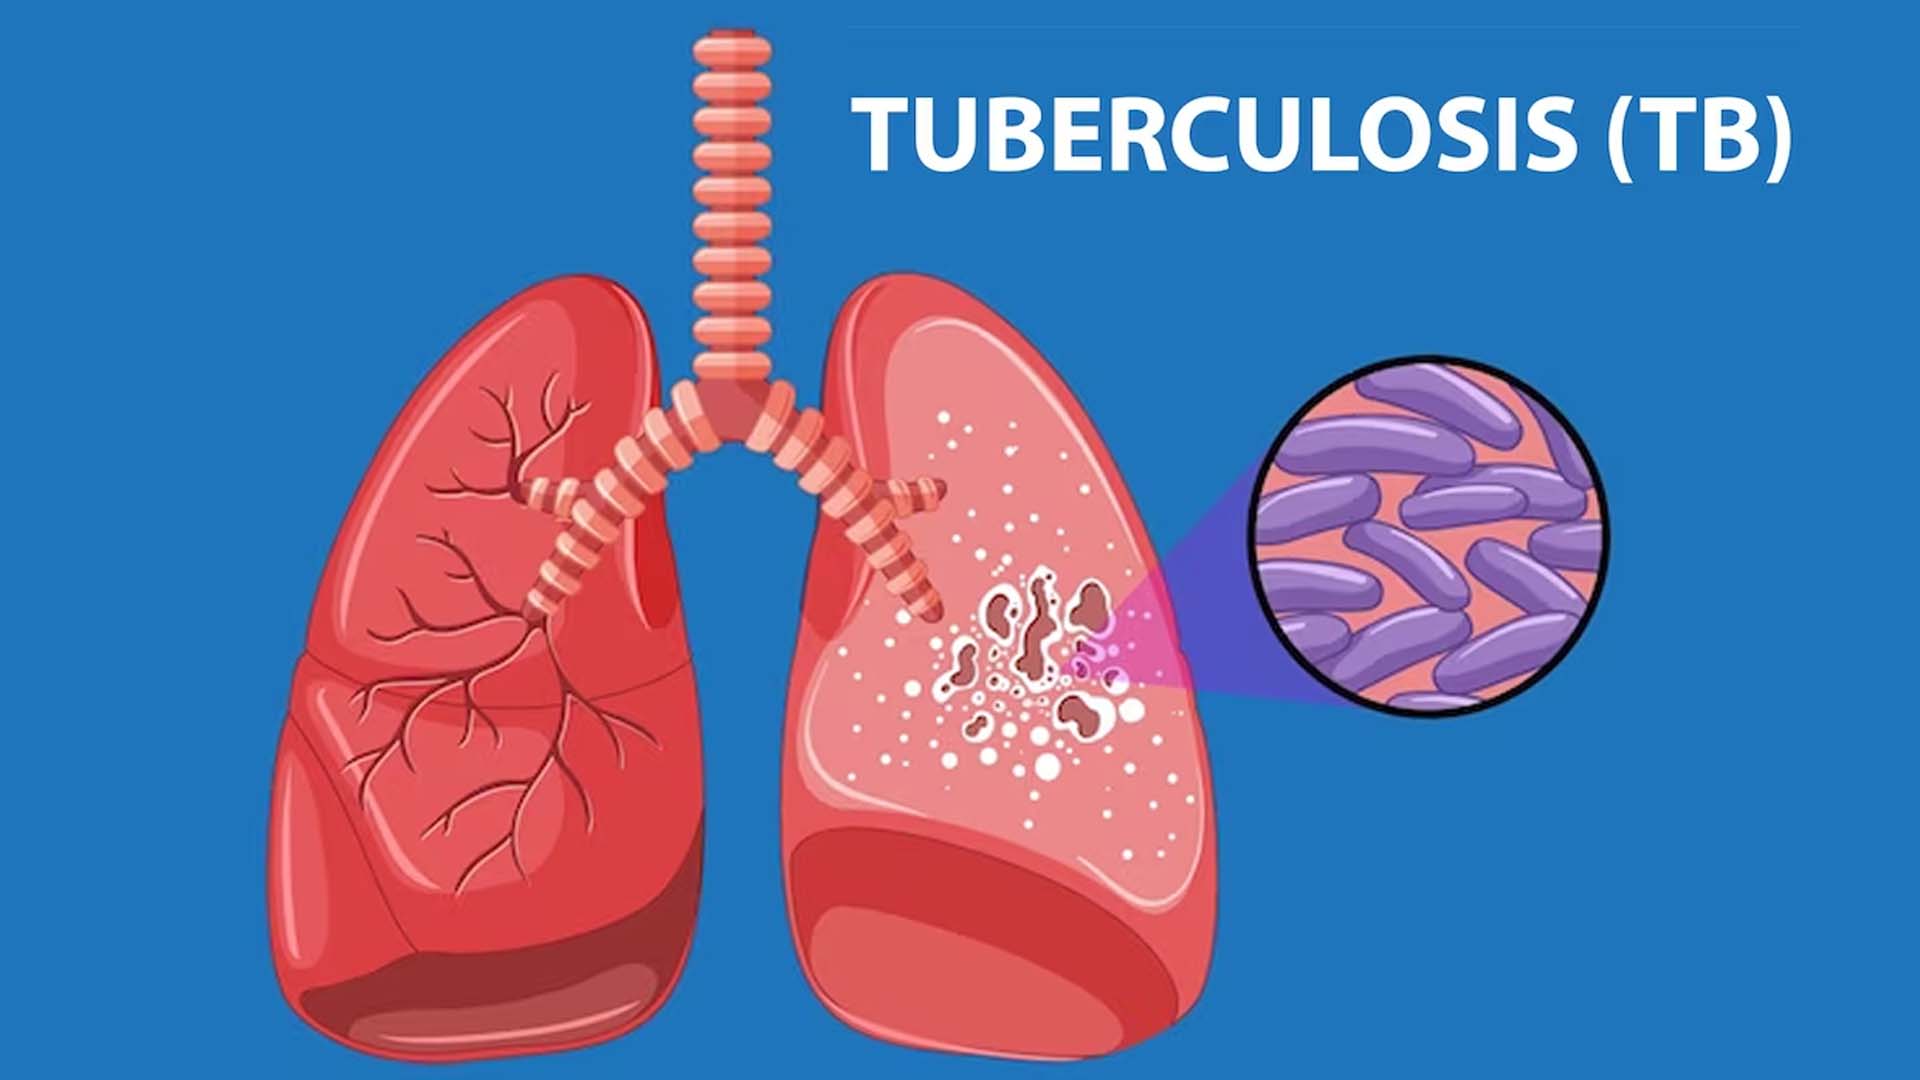 Tuberculosis caused with bacteria